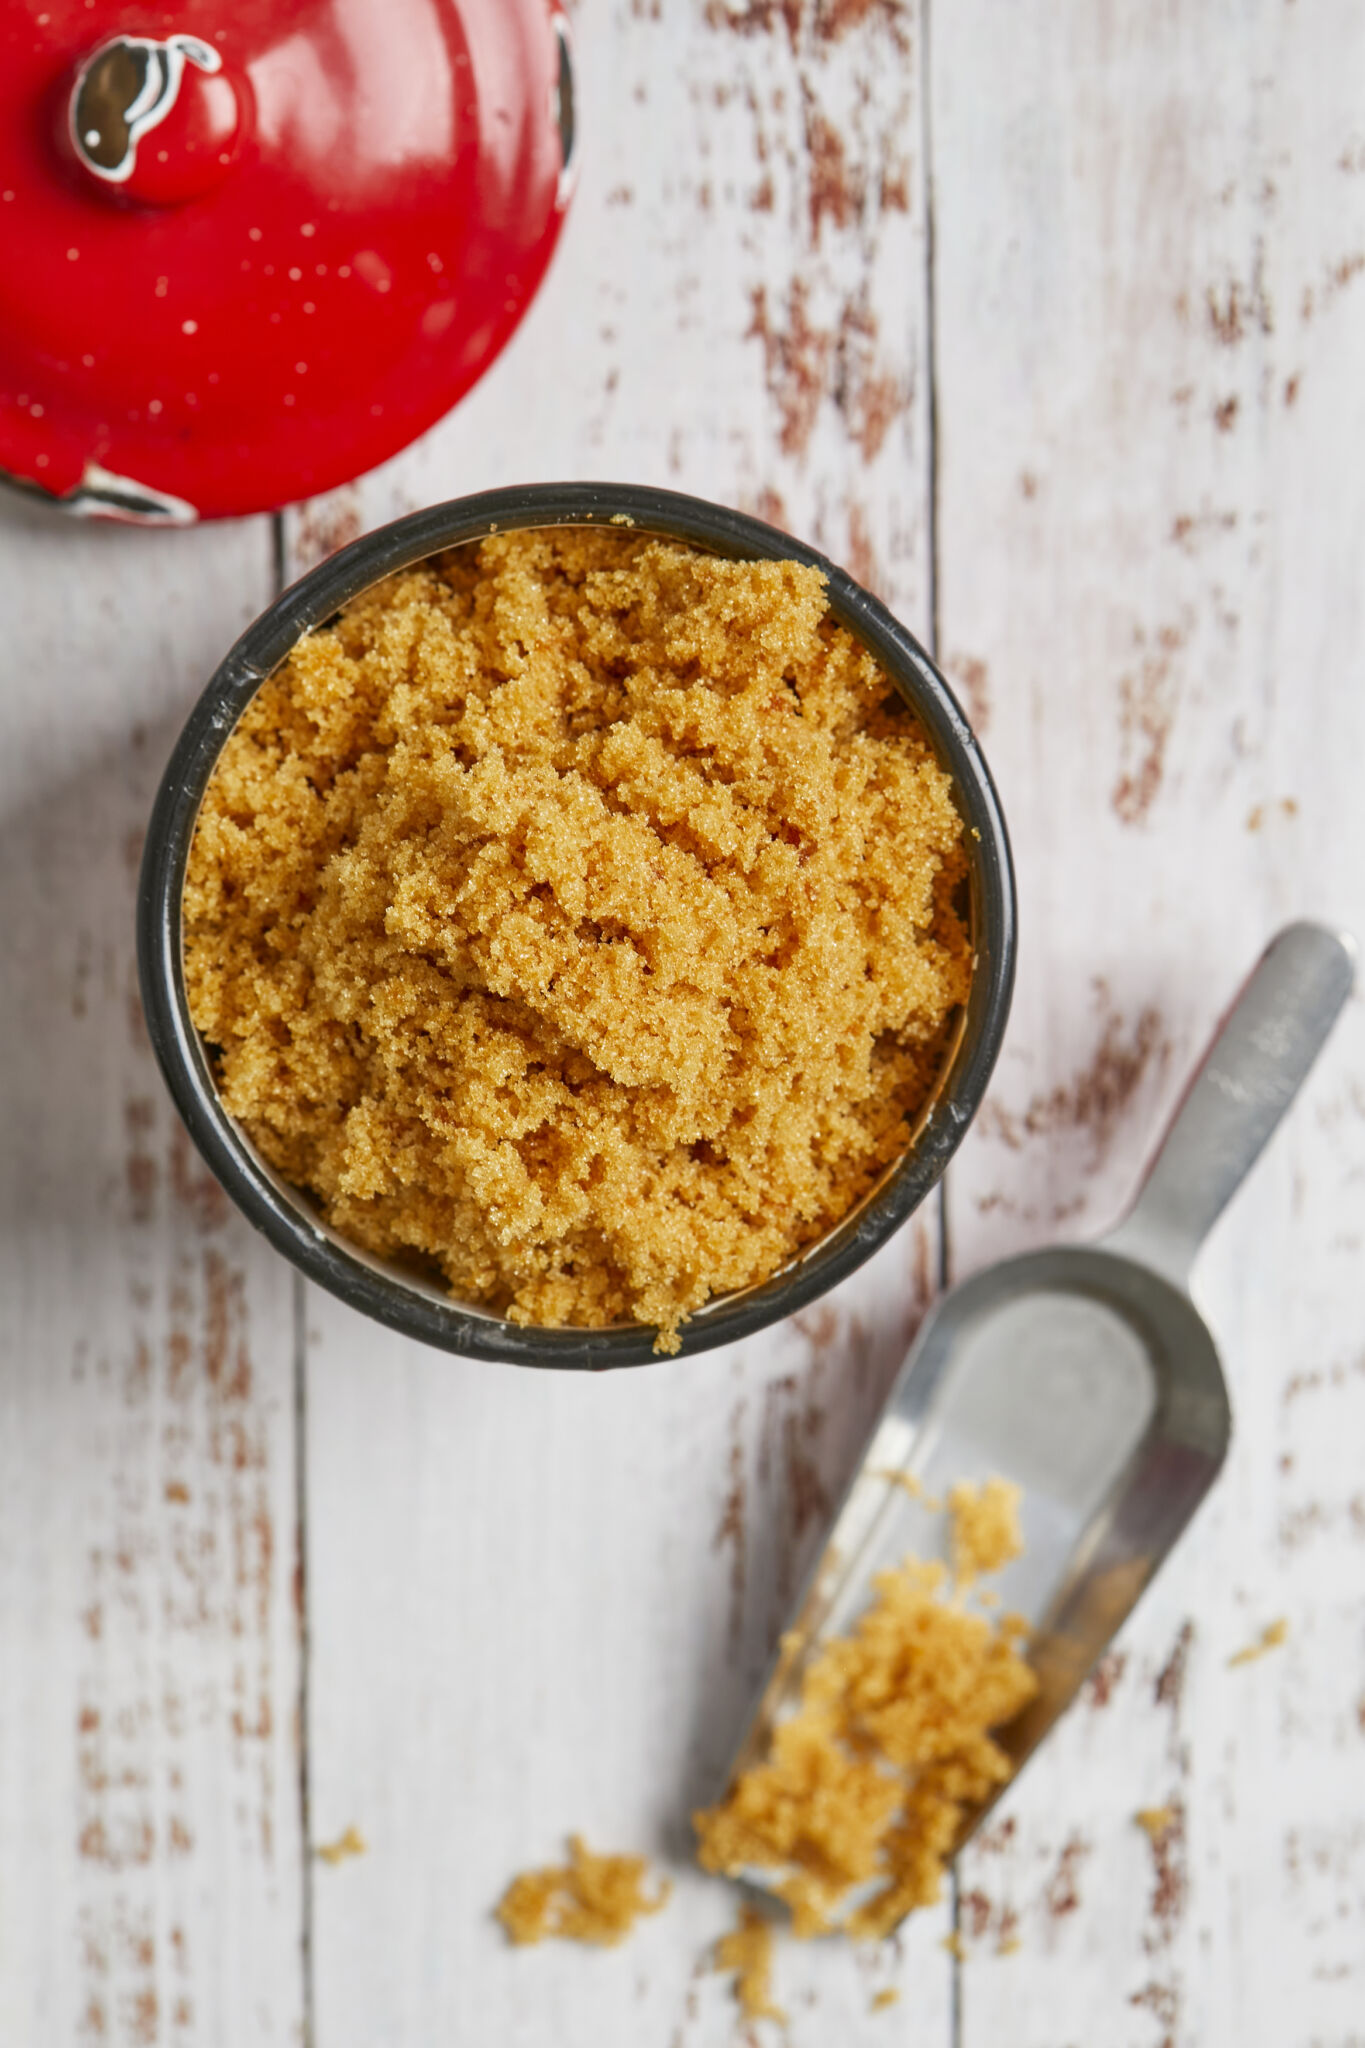 Homemade brown sugar is stored in an enamel mug with a lid in the top left corner and a metal scoop next to it in the bottom right corner.